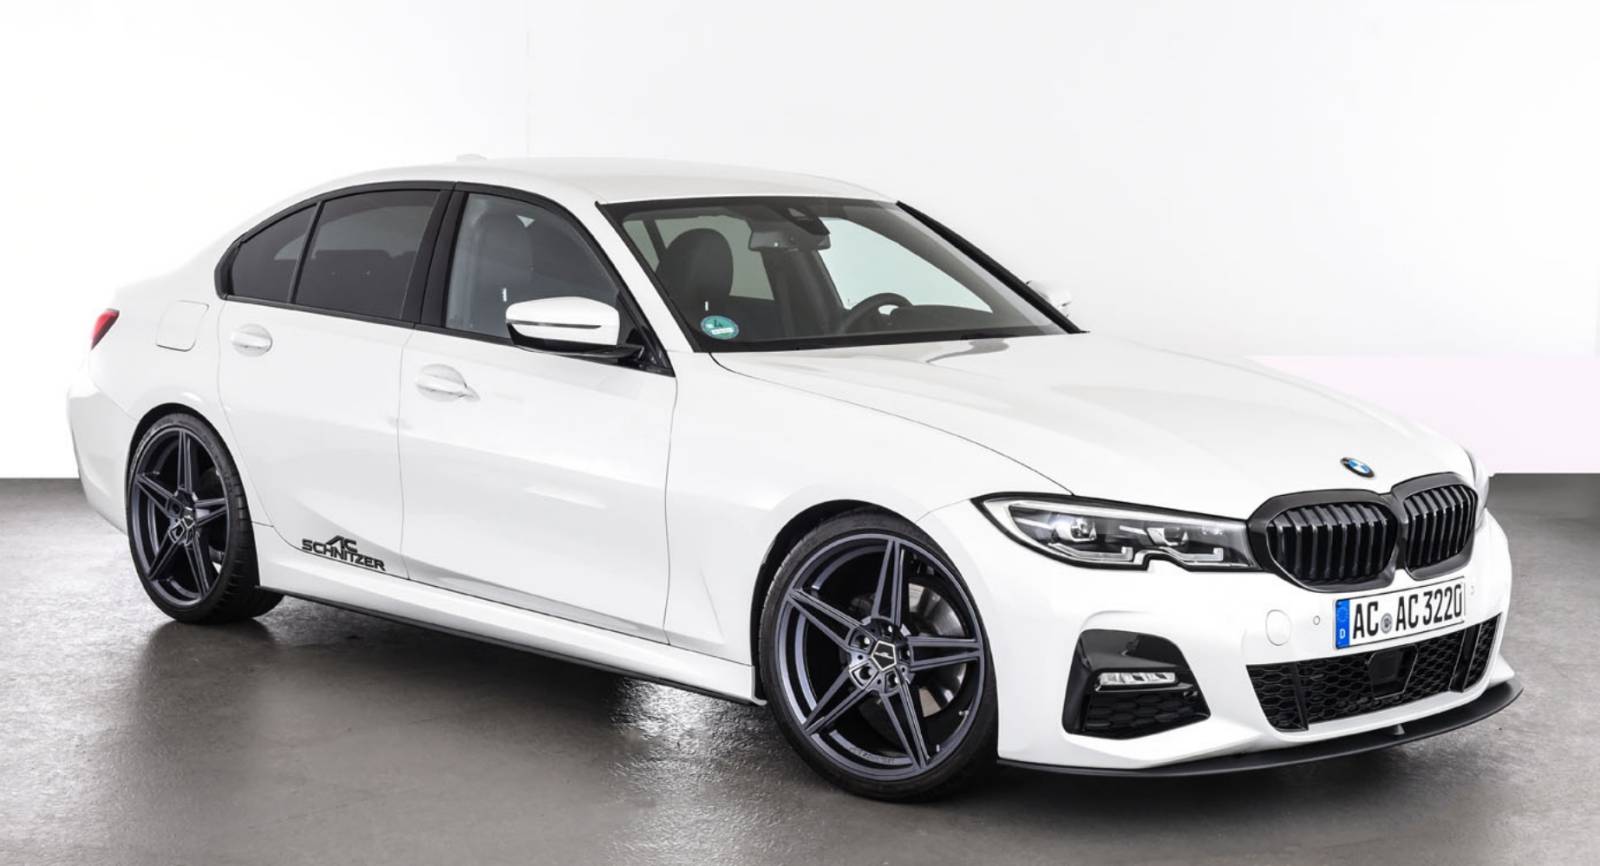 https://www.carscoops.com/wp-content/uploads/2019/05/7891fb81-ac-schnitzer-tuning-parts-for-the-bmw-3-series-g20-0.jpg